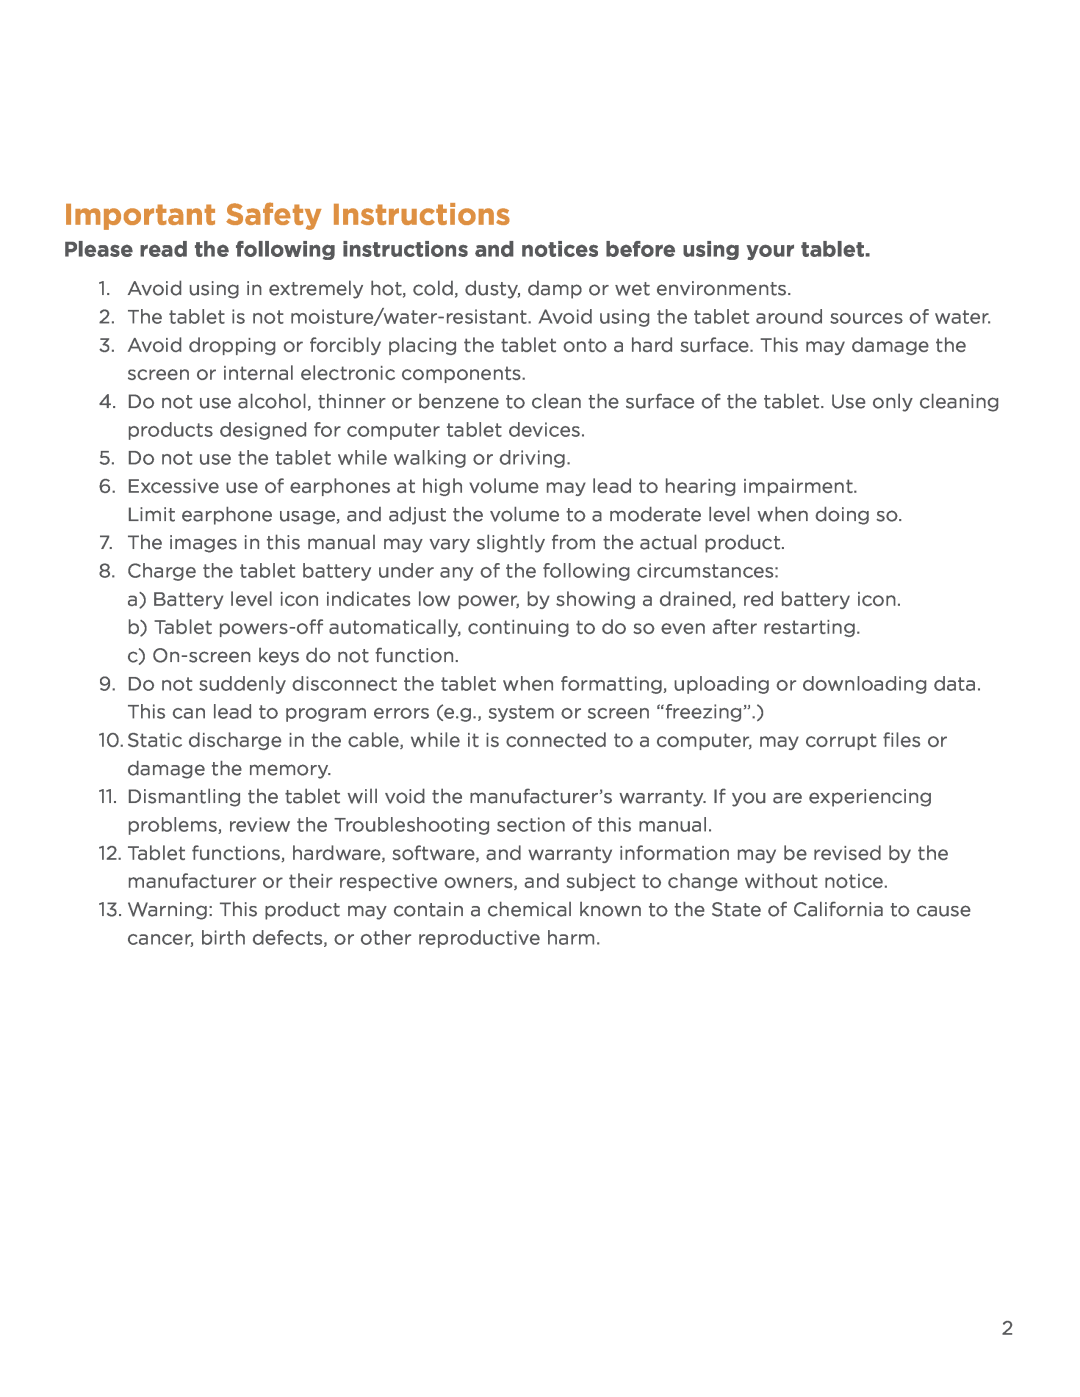 NuVision TM1218 user manual Important Safety Instructions 